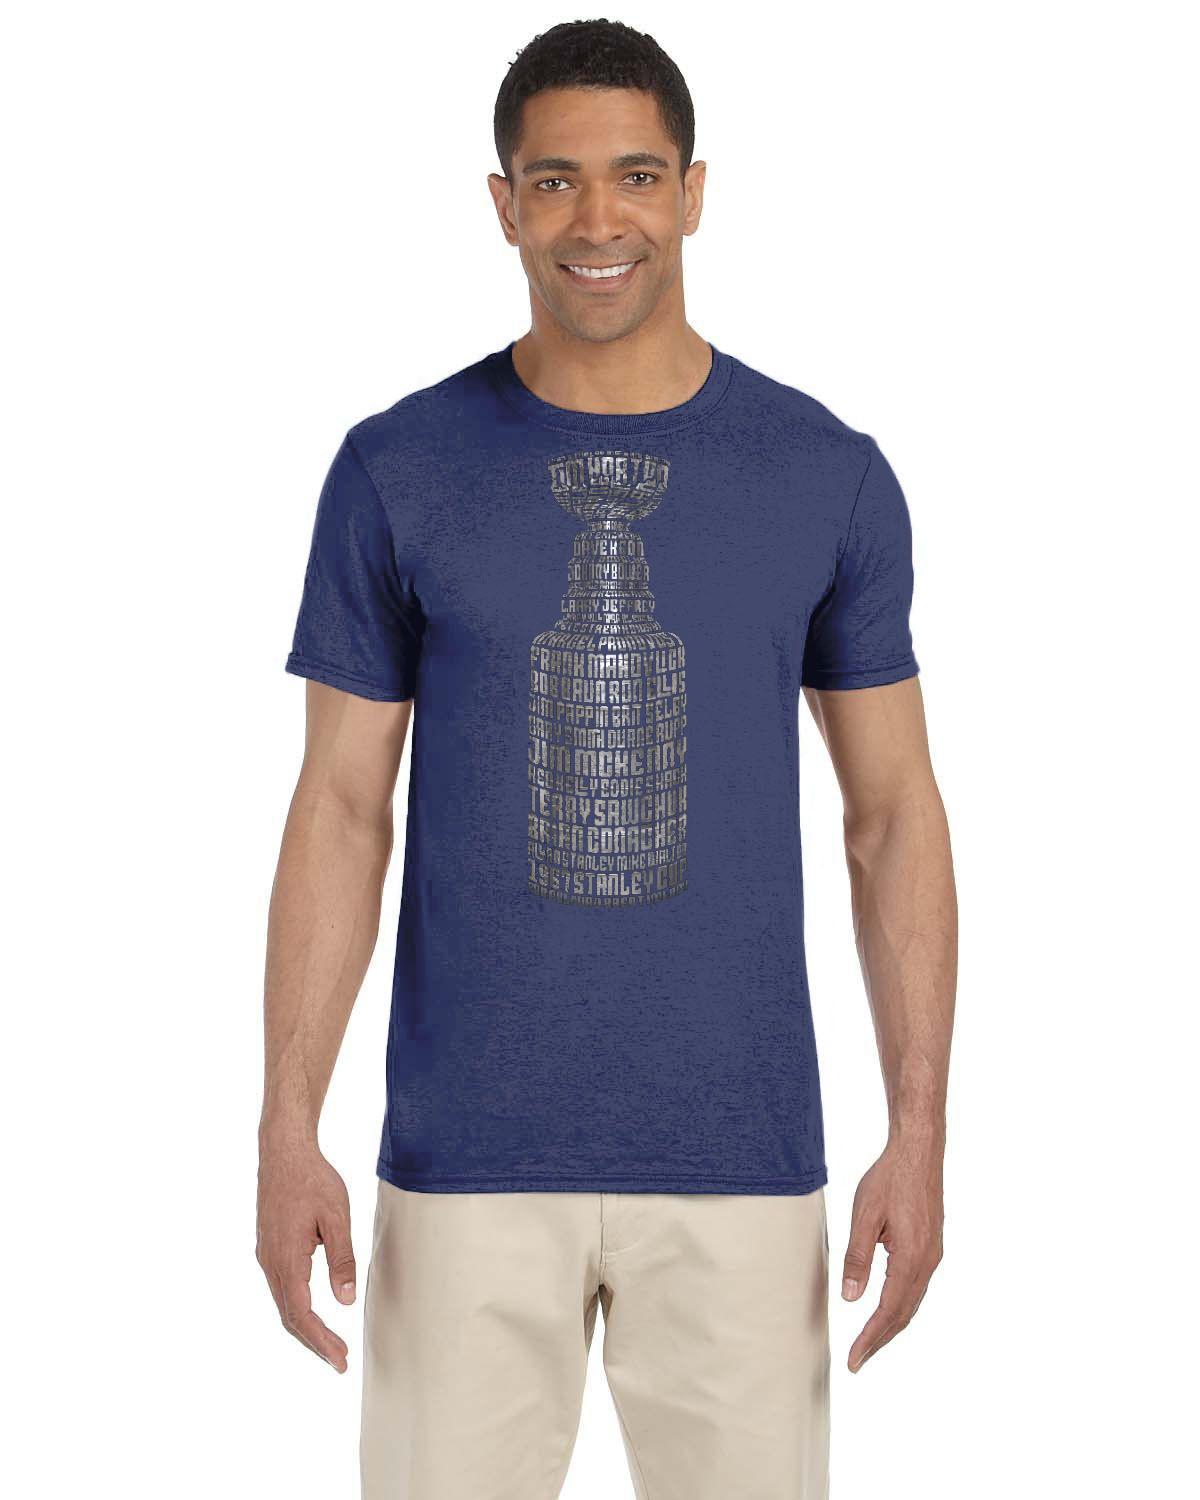 1967 Stanley Cup Champion Toronto Maple Leafs Typography Graphic on Gildan Adult Softstyle T-Shirt